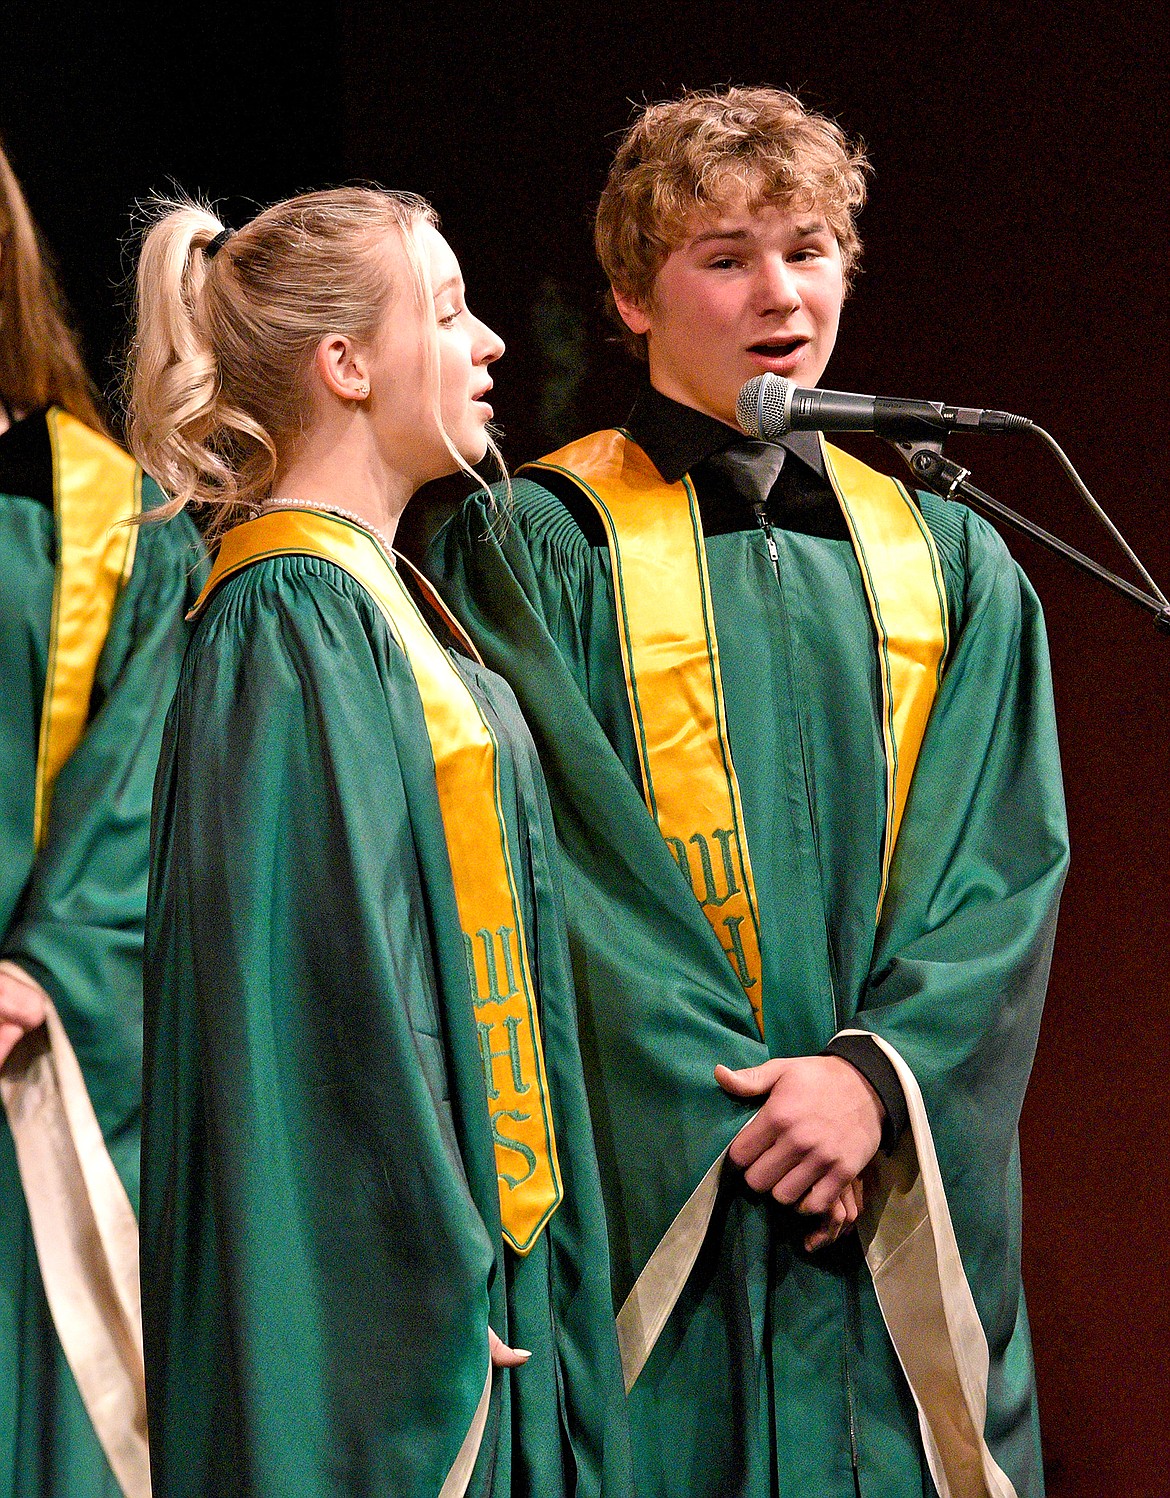 WHS students Annie Walsh and Sam Nissen perform a duet during the Whitefish High School and Middle School winter choir concert at the Performing Arts Center on Dec. 8. (Whitney England/Whitefish Pilot)